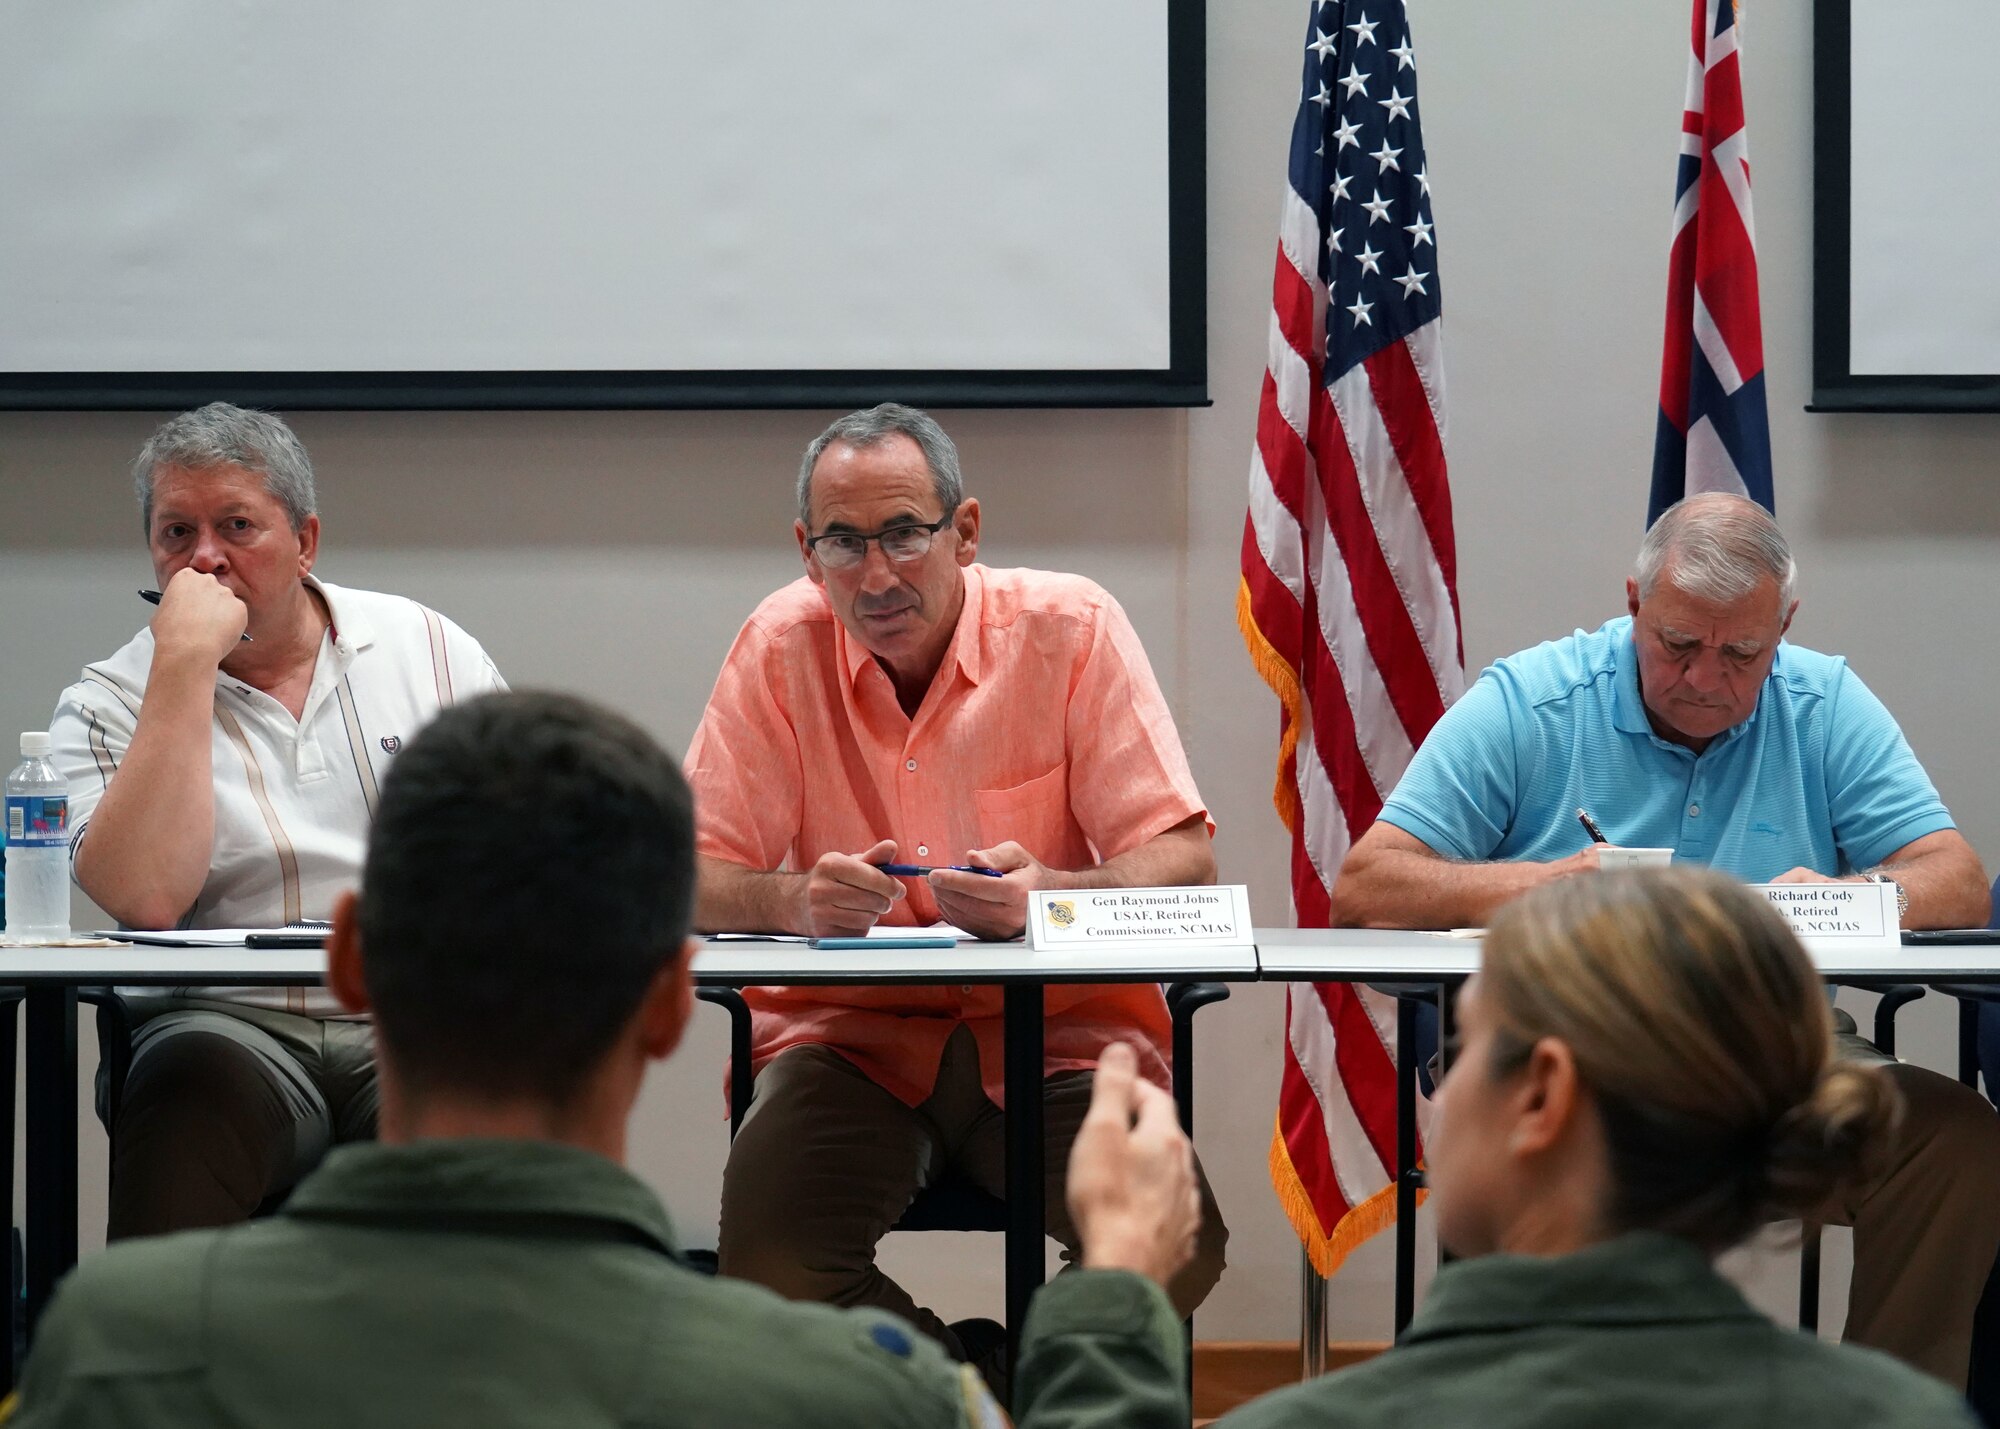 The National Commission on Military Aviation Safety listens to concerns from Total Force Integration Squadron Commanders at Joint Base Pearl Harbor-Hickam, Hawaii, Nov. 1, 2019. The NCMAS have visited over 70 different sites to try and reduce the number of aircraft mishaps in military aviation. The visit to Hickam was significant due to the active duty and guard Total Force Integration of Hickam Airfield. (U.S. Air Force photo by Airman 1st Class Erin Baxter)